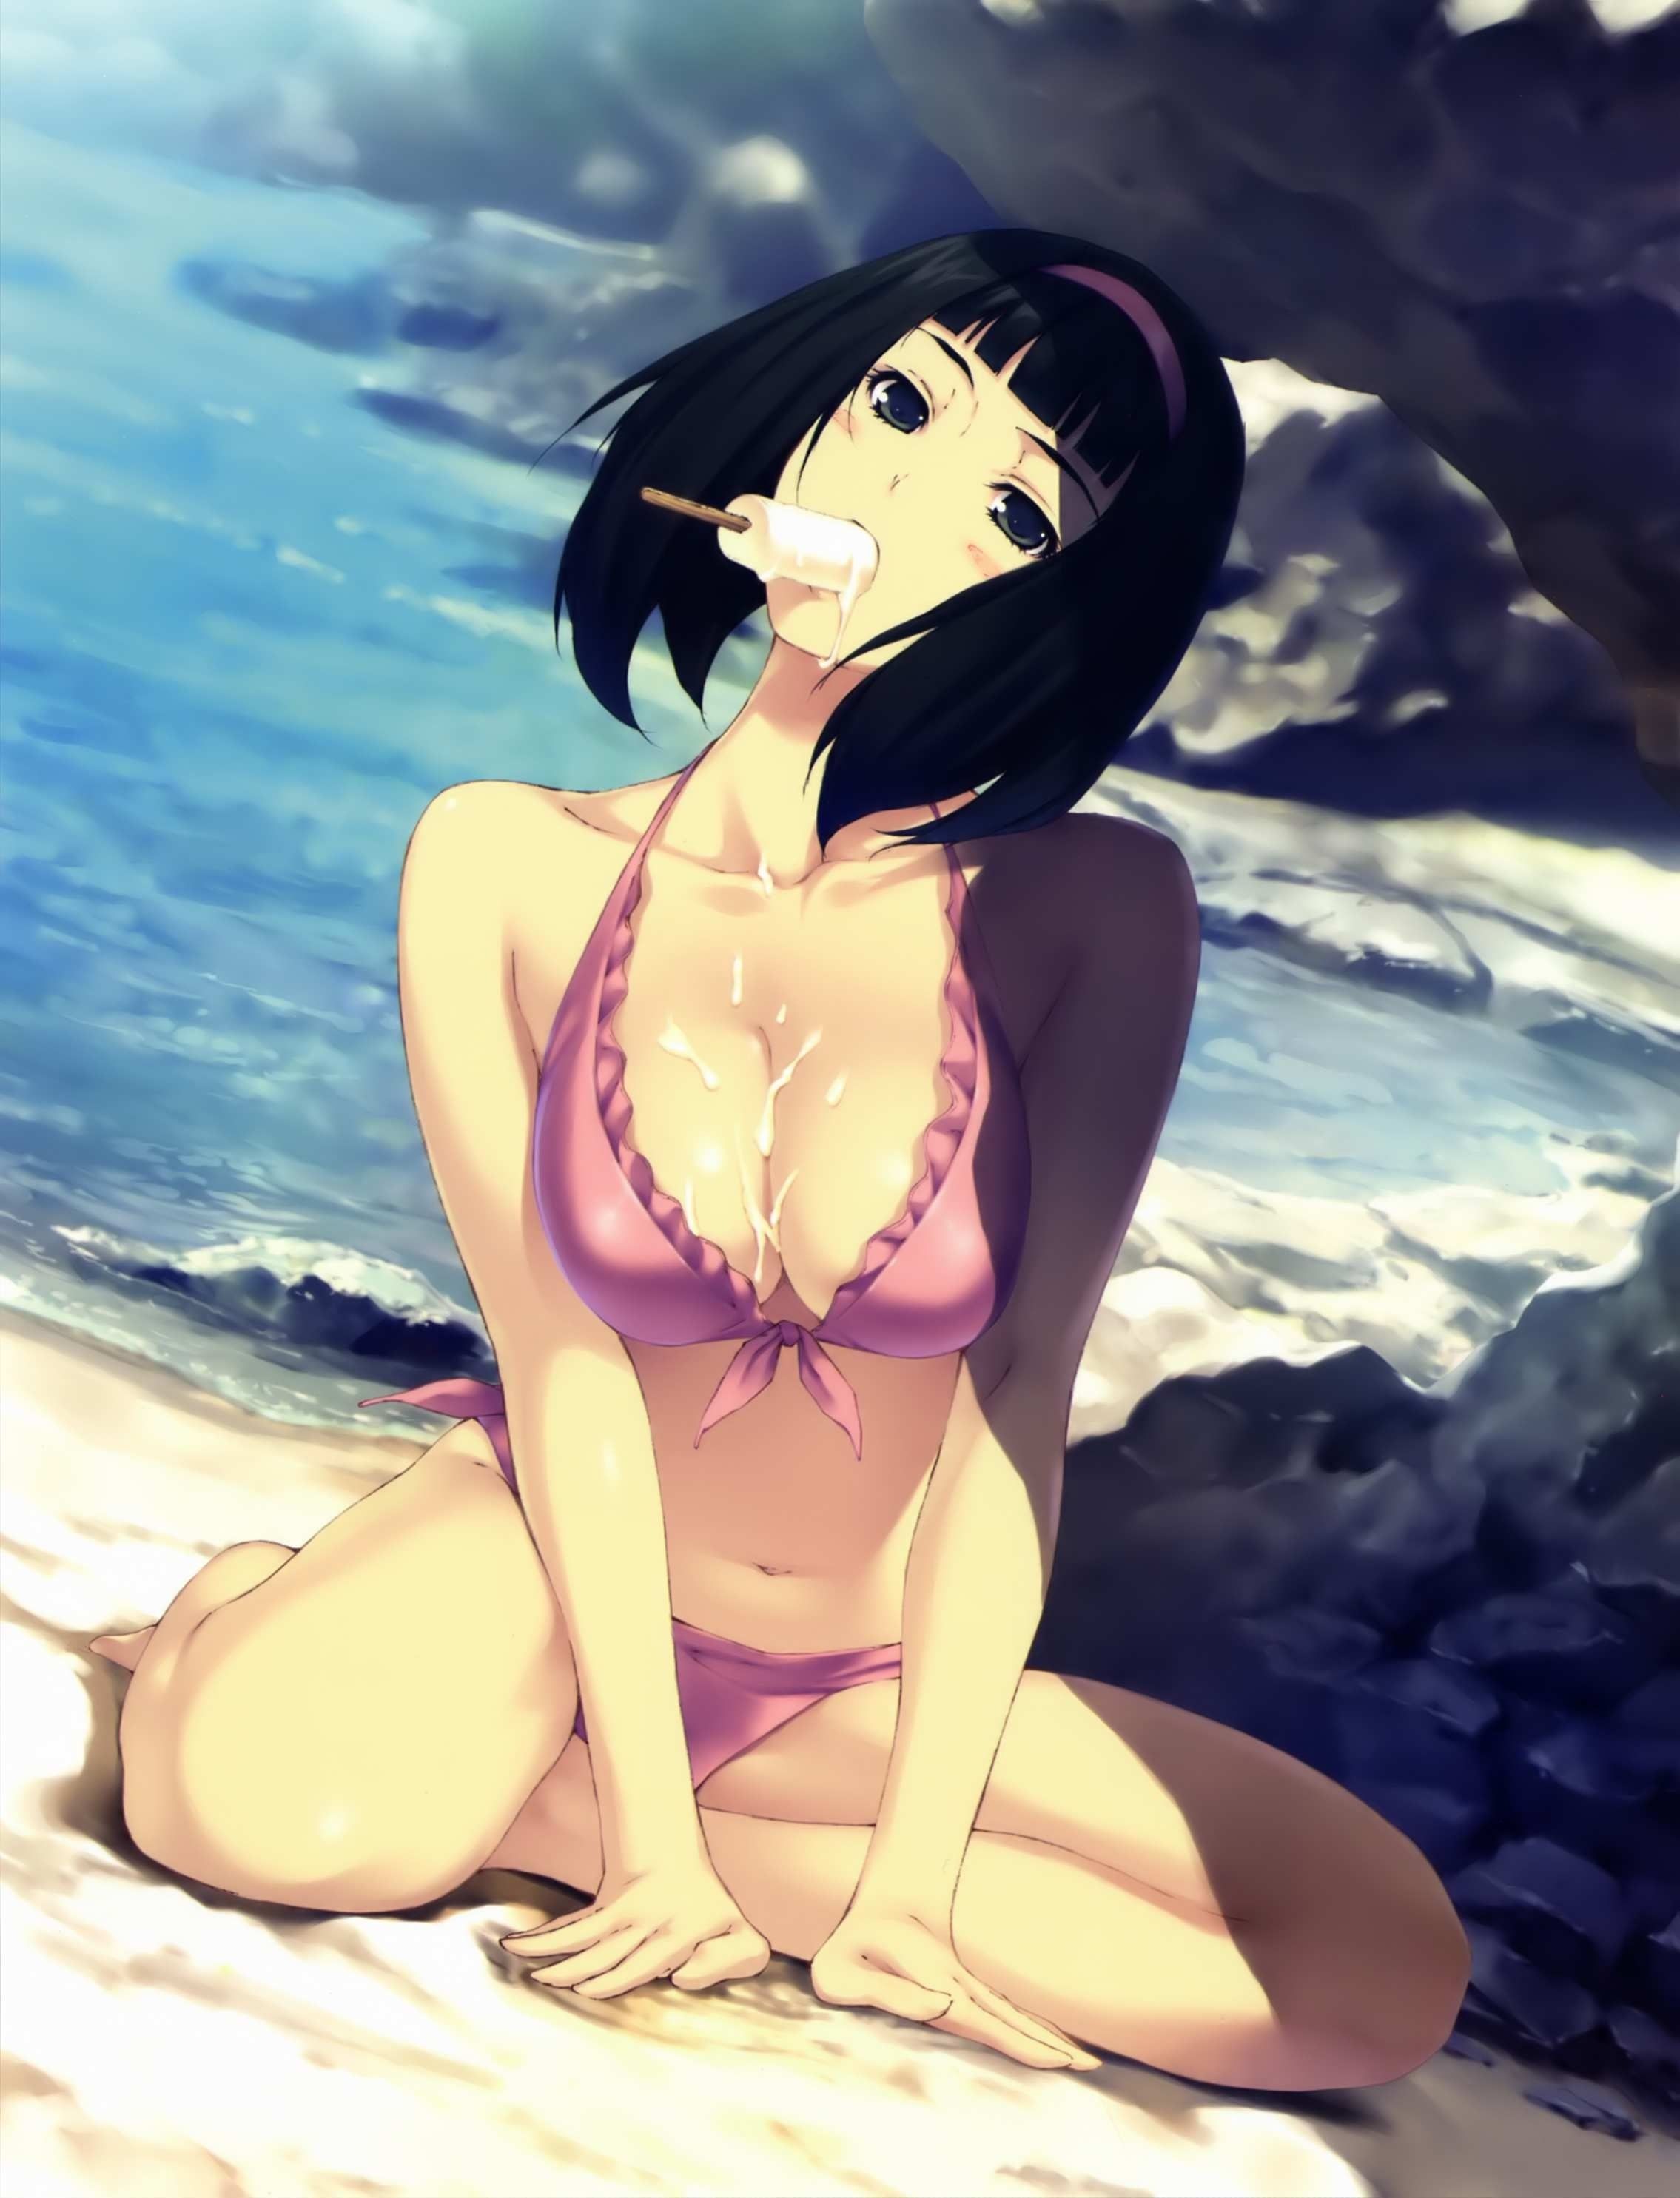 Refreshes the skin component for girl bikini pictures. Vol.10 5